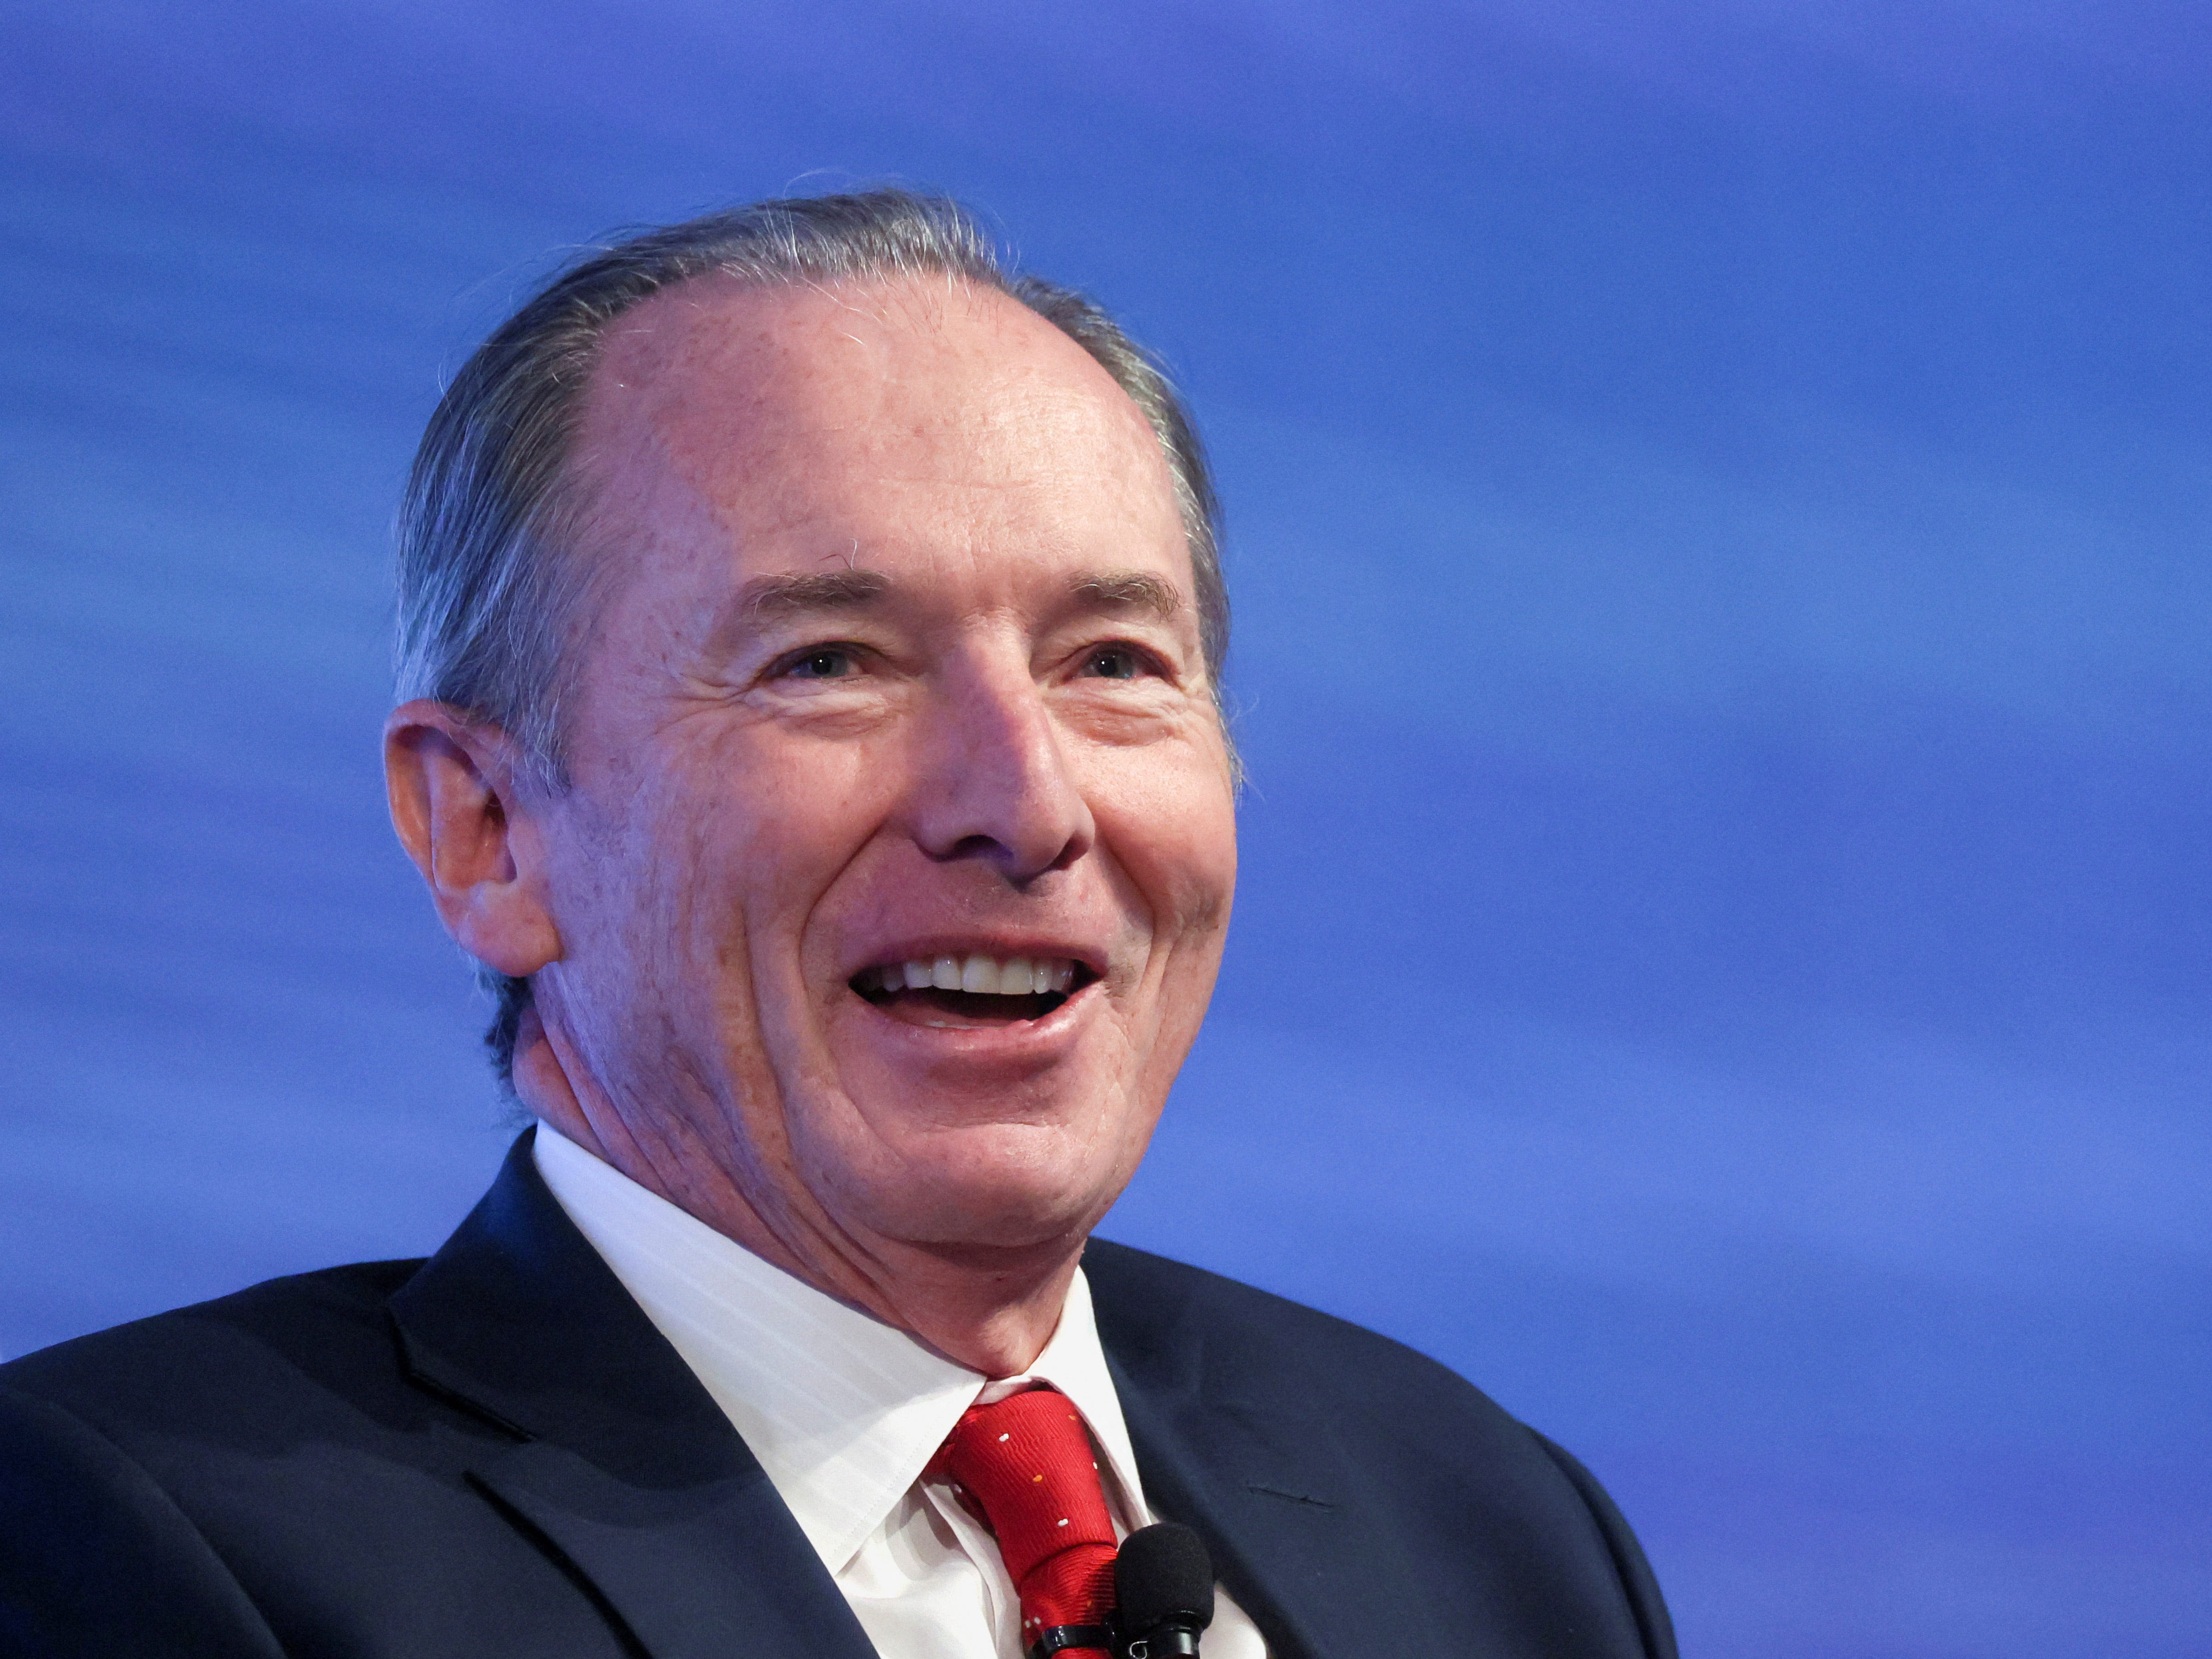 James Gorman is bringing his 18-year stint at Morgan Stanley to an end